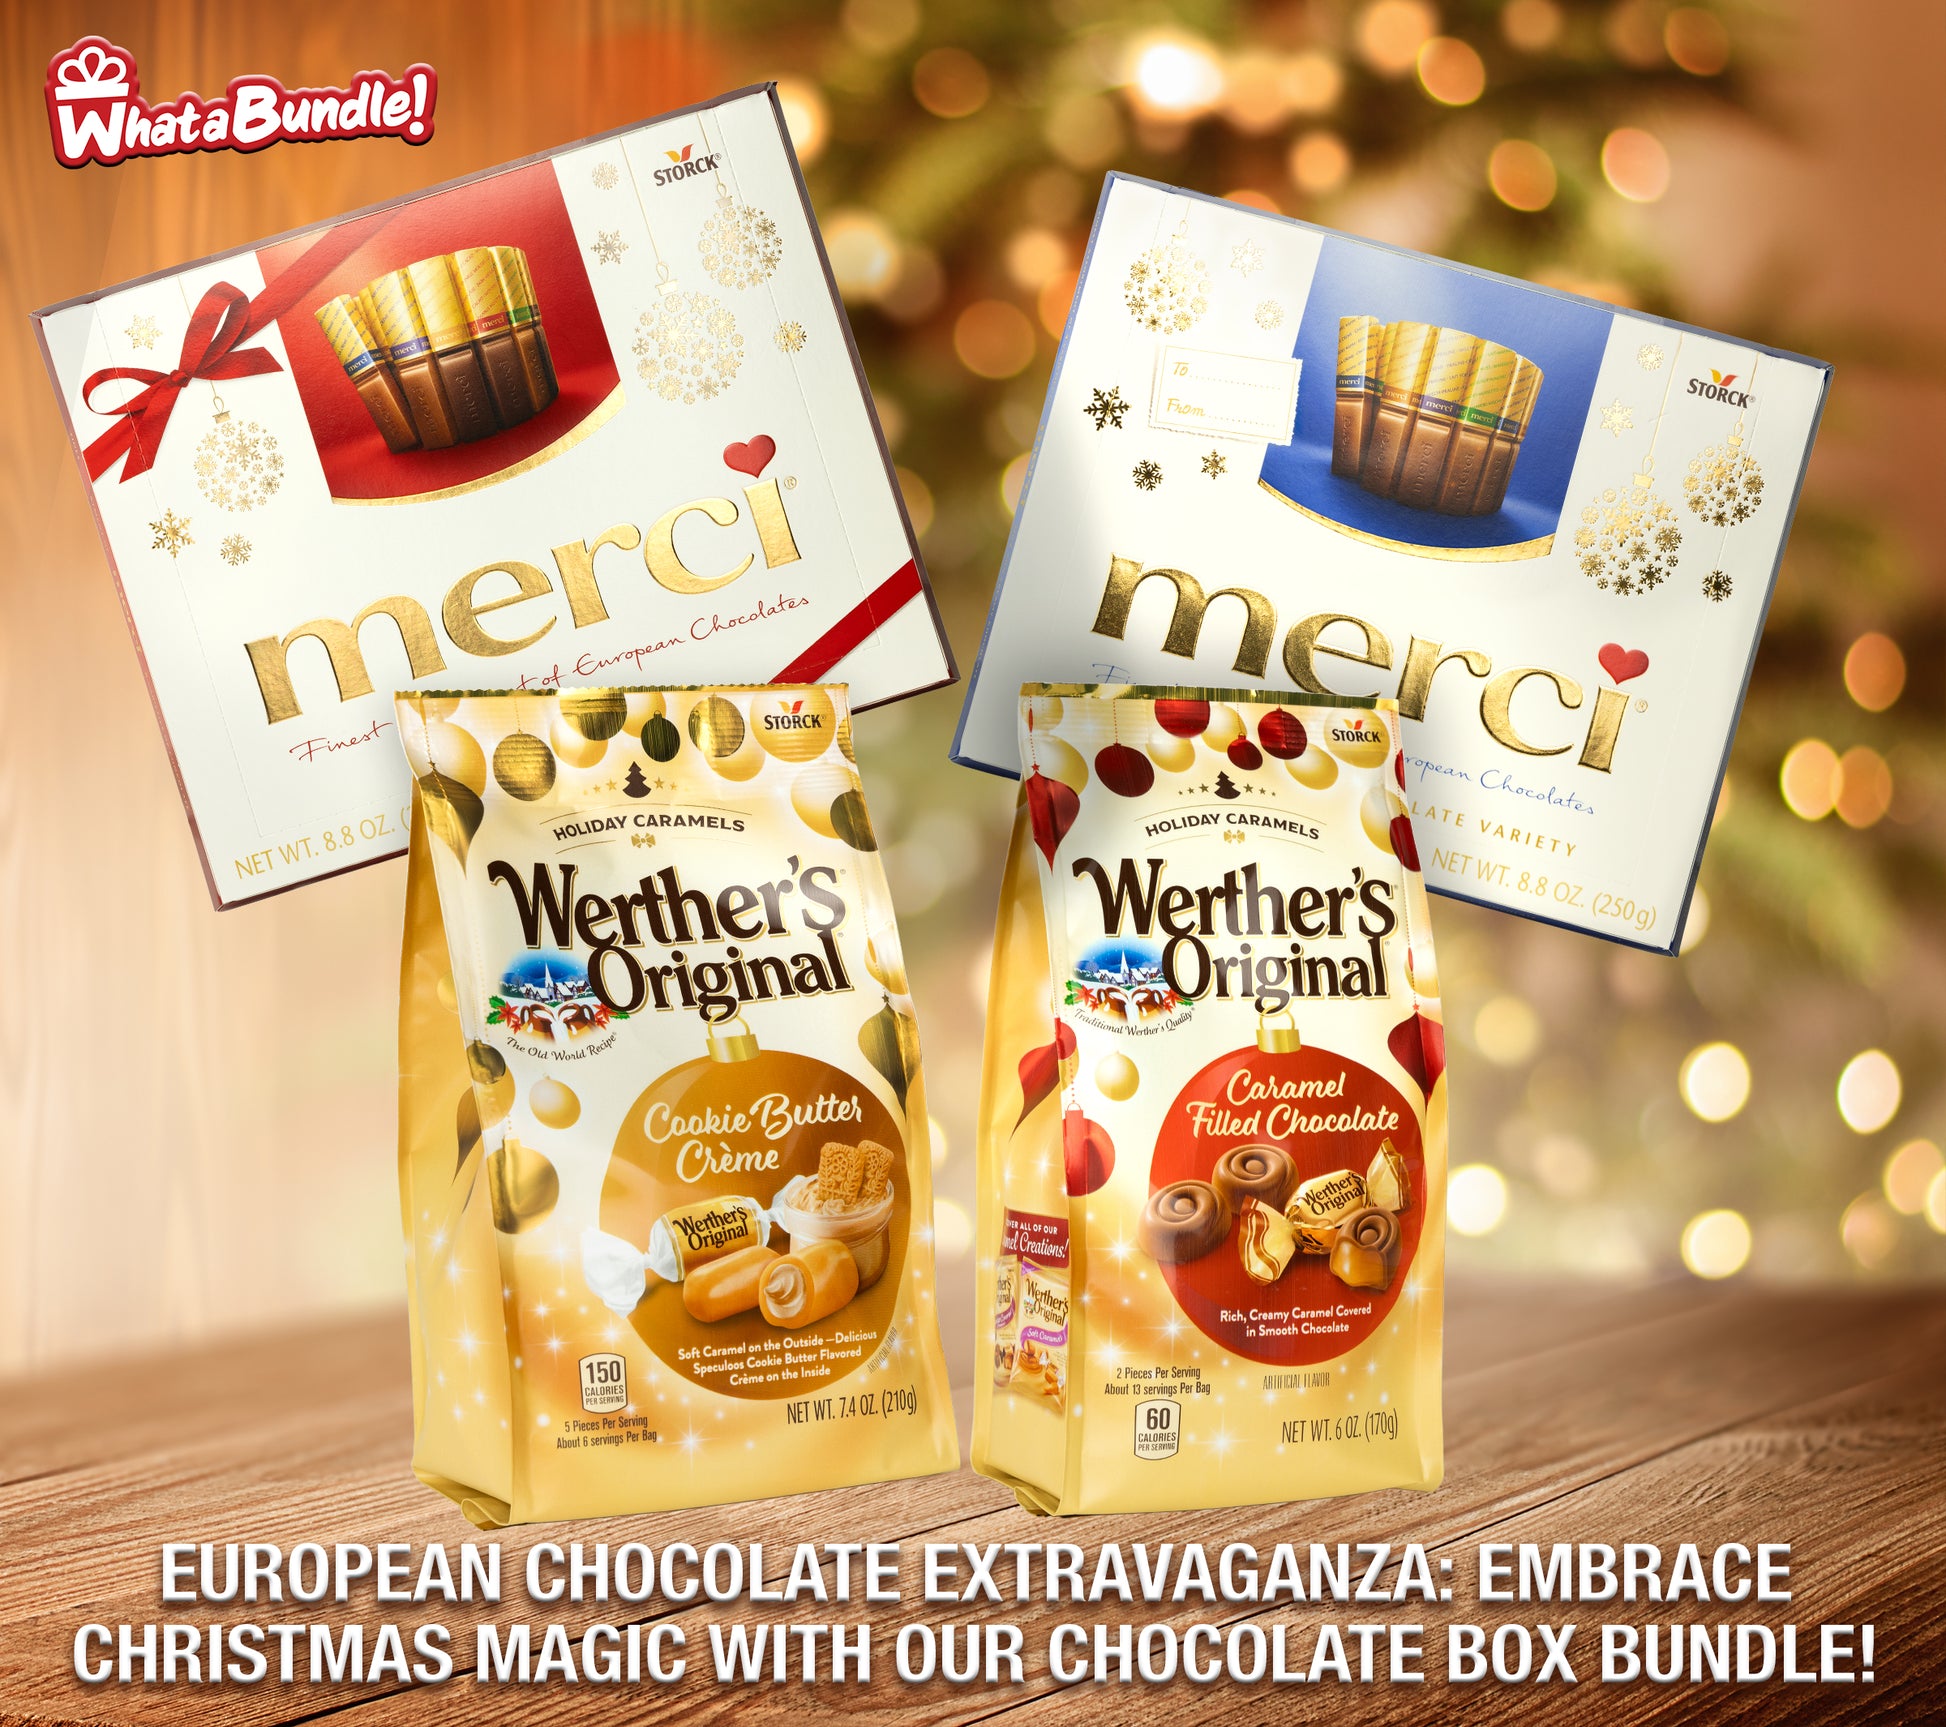 Compare prices for REGALO DULCE across all European  stores